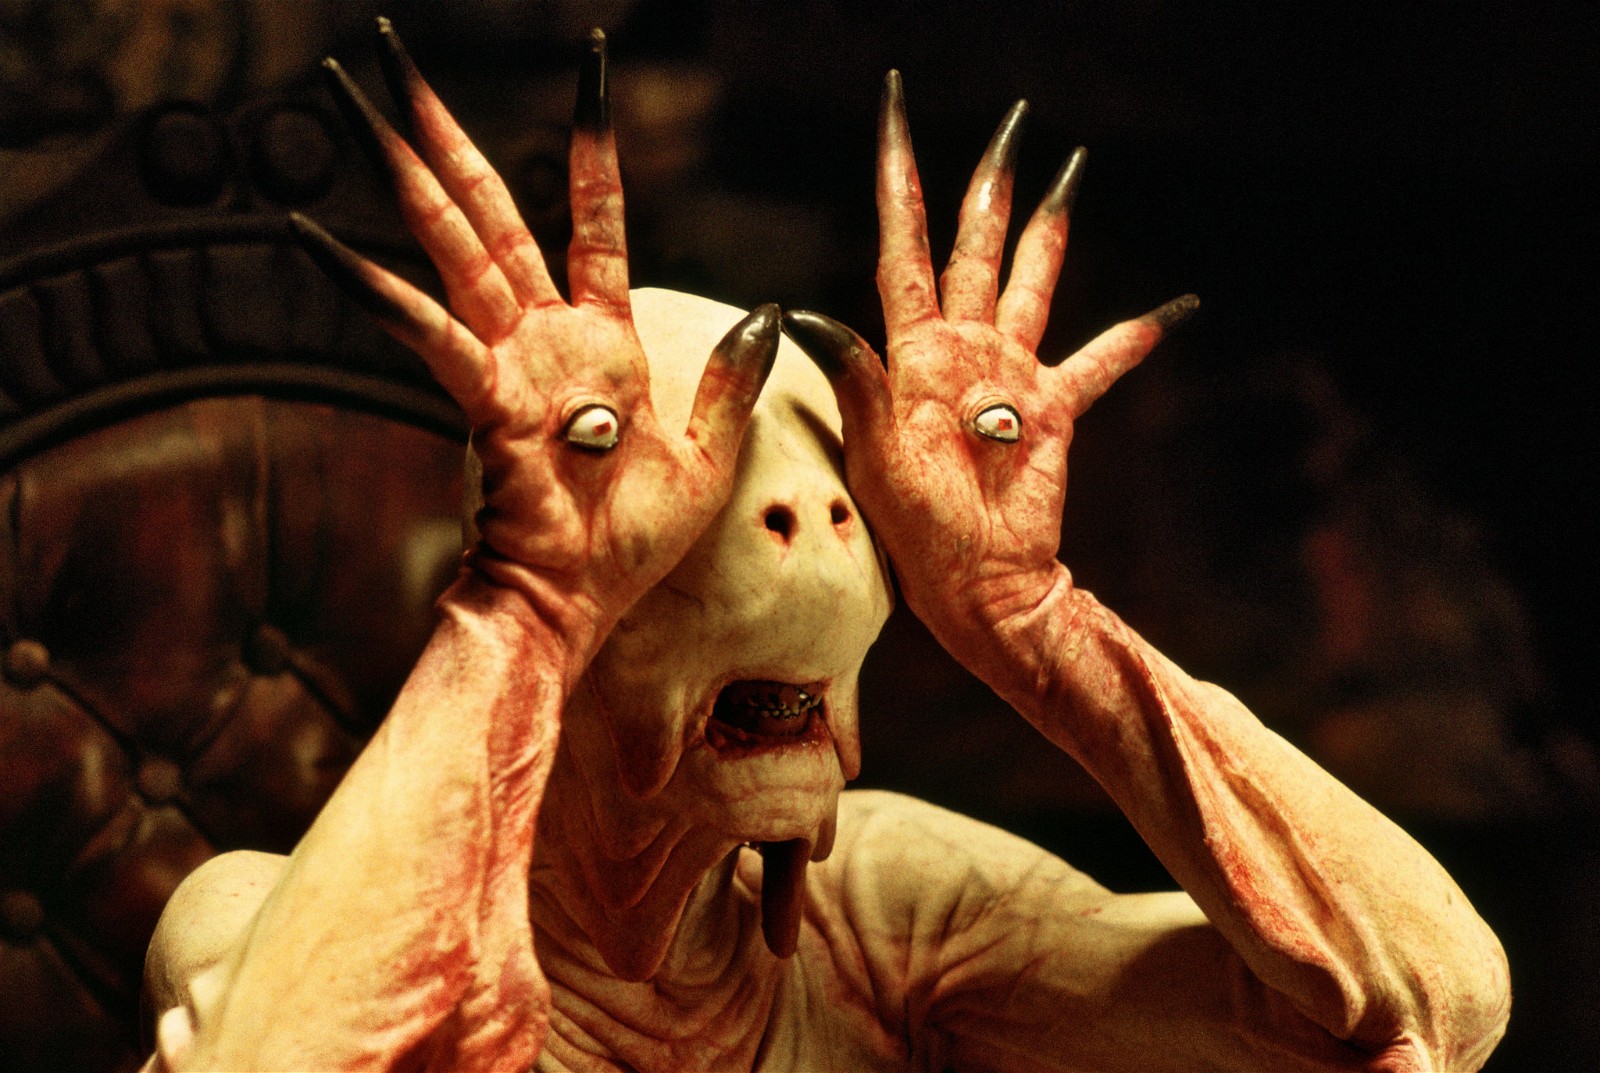 A still from Pan's Labyrinth